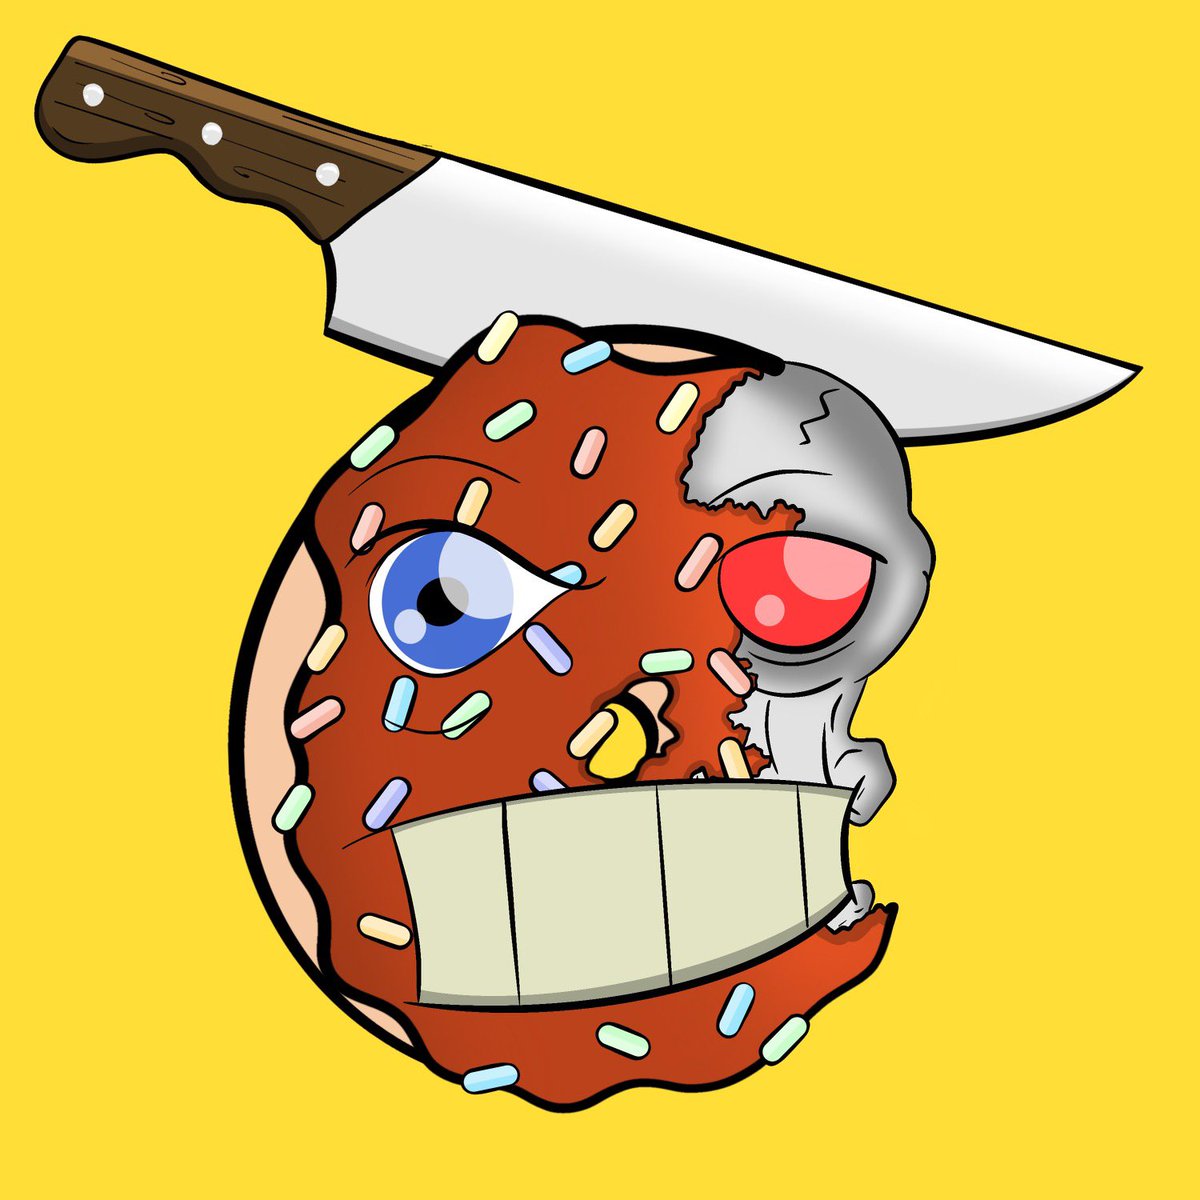 Life is brutal when your a killer cyborg glazed donut…. With sprinkles. #Cardano